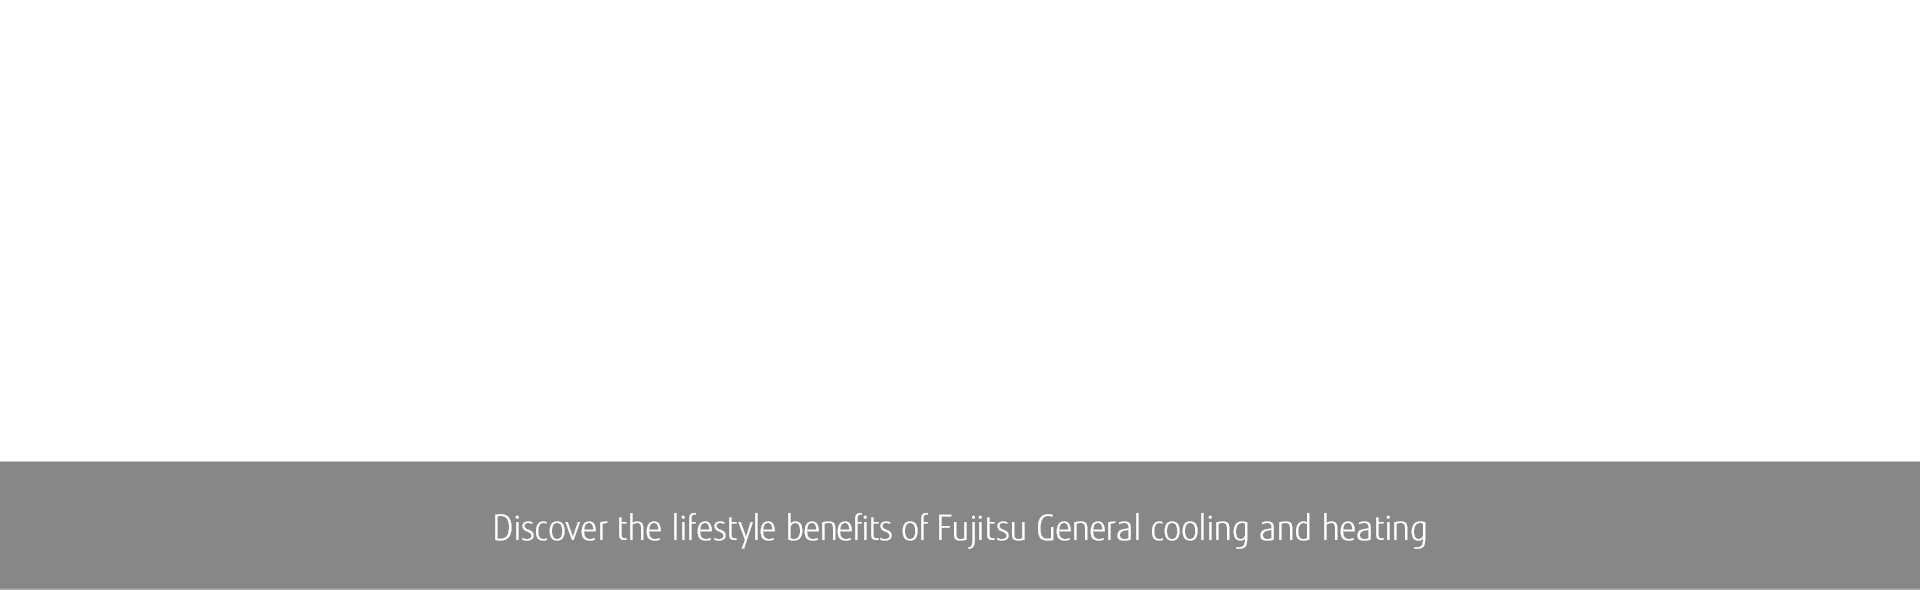 RESIDENTIAL AIRSTAGE MINI-SPLIT BENEFITS: Discover the lifestyle benefits of Fujitsu General cooling and heating.